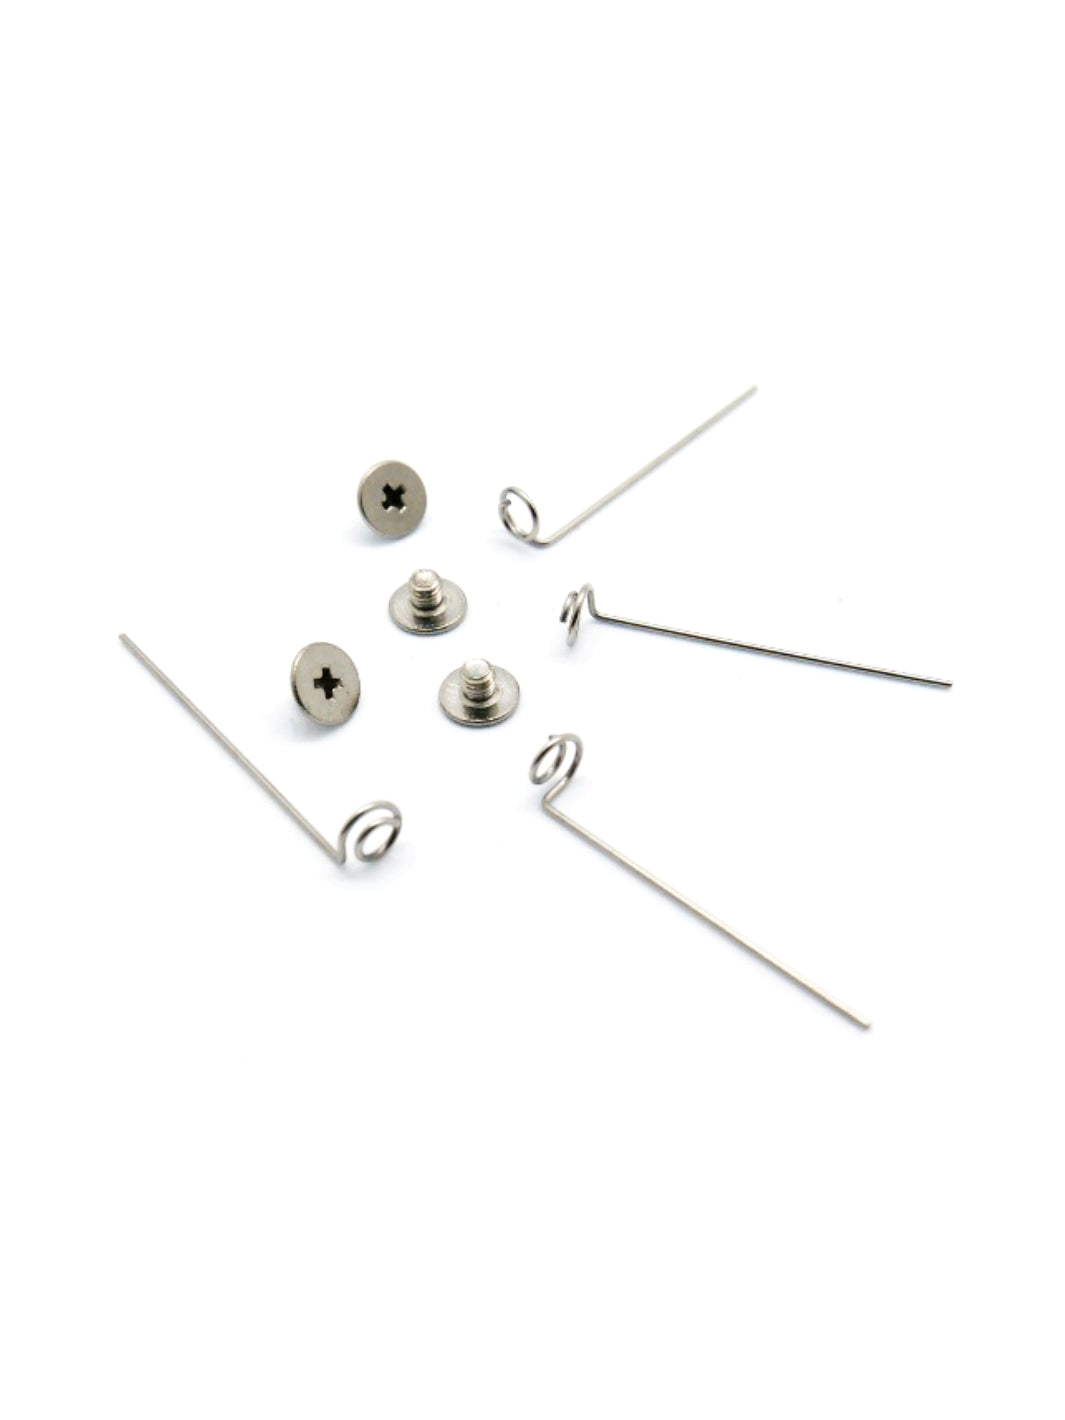 DUOMO Replacement Pins and Screws (No Plate) (4-Pack)